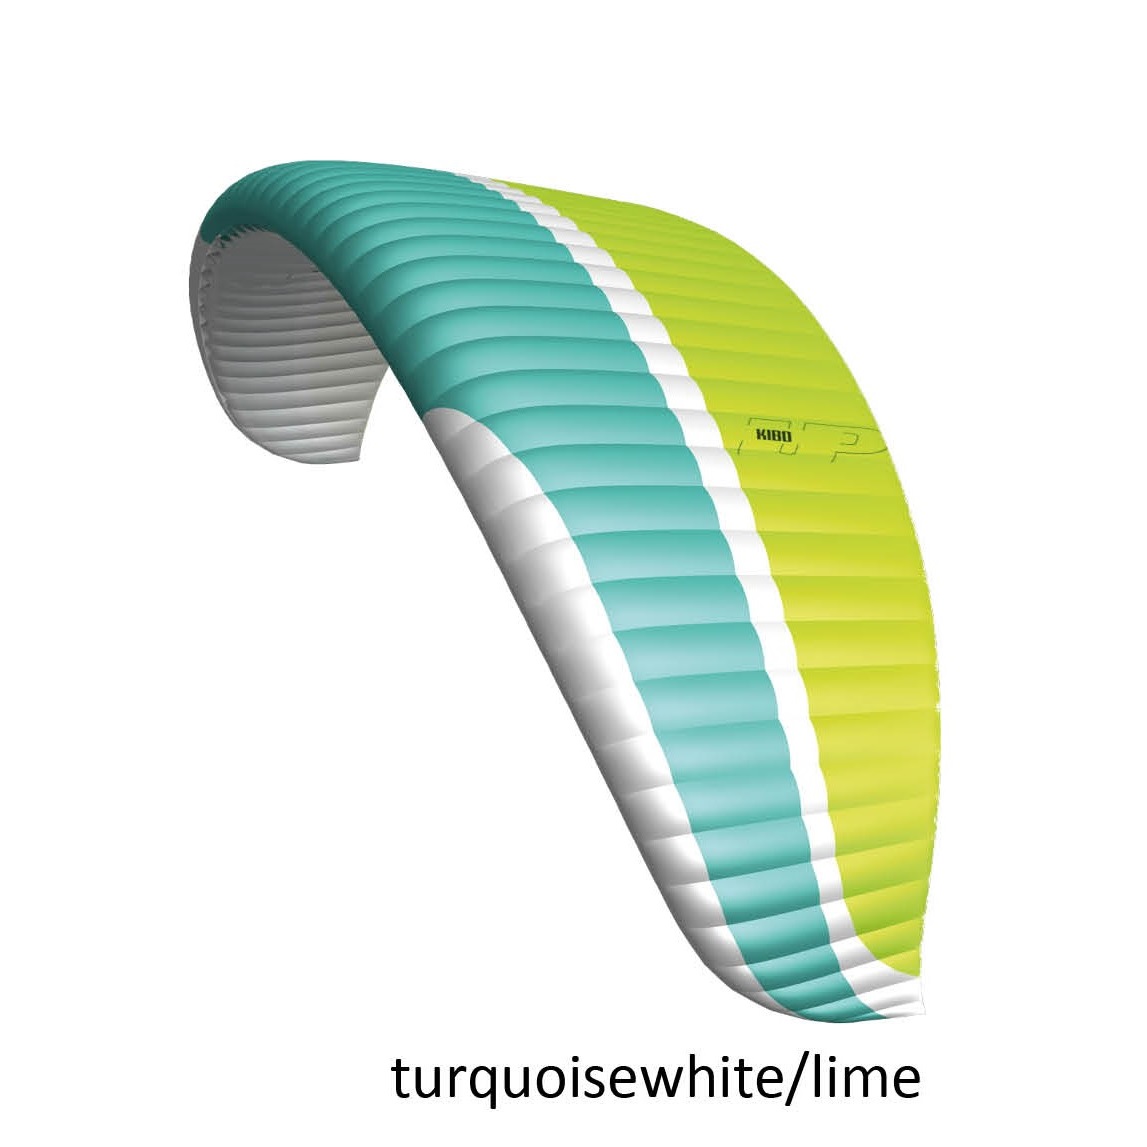 turquoisewhite/lime